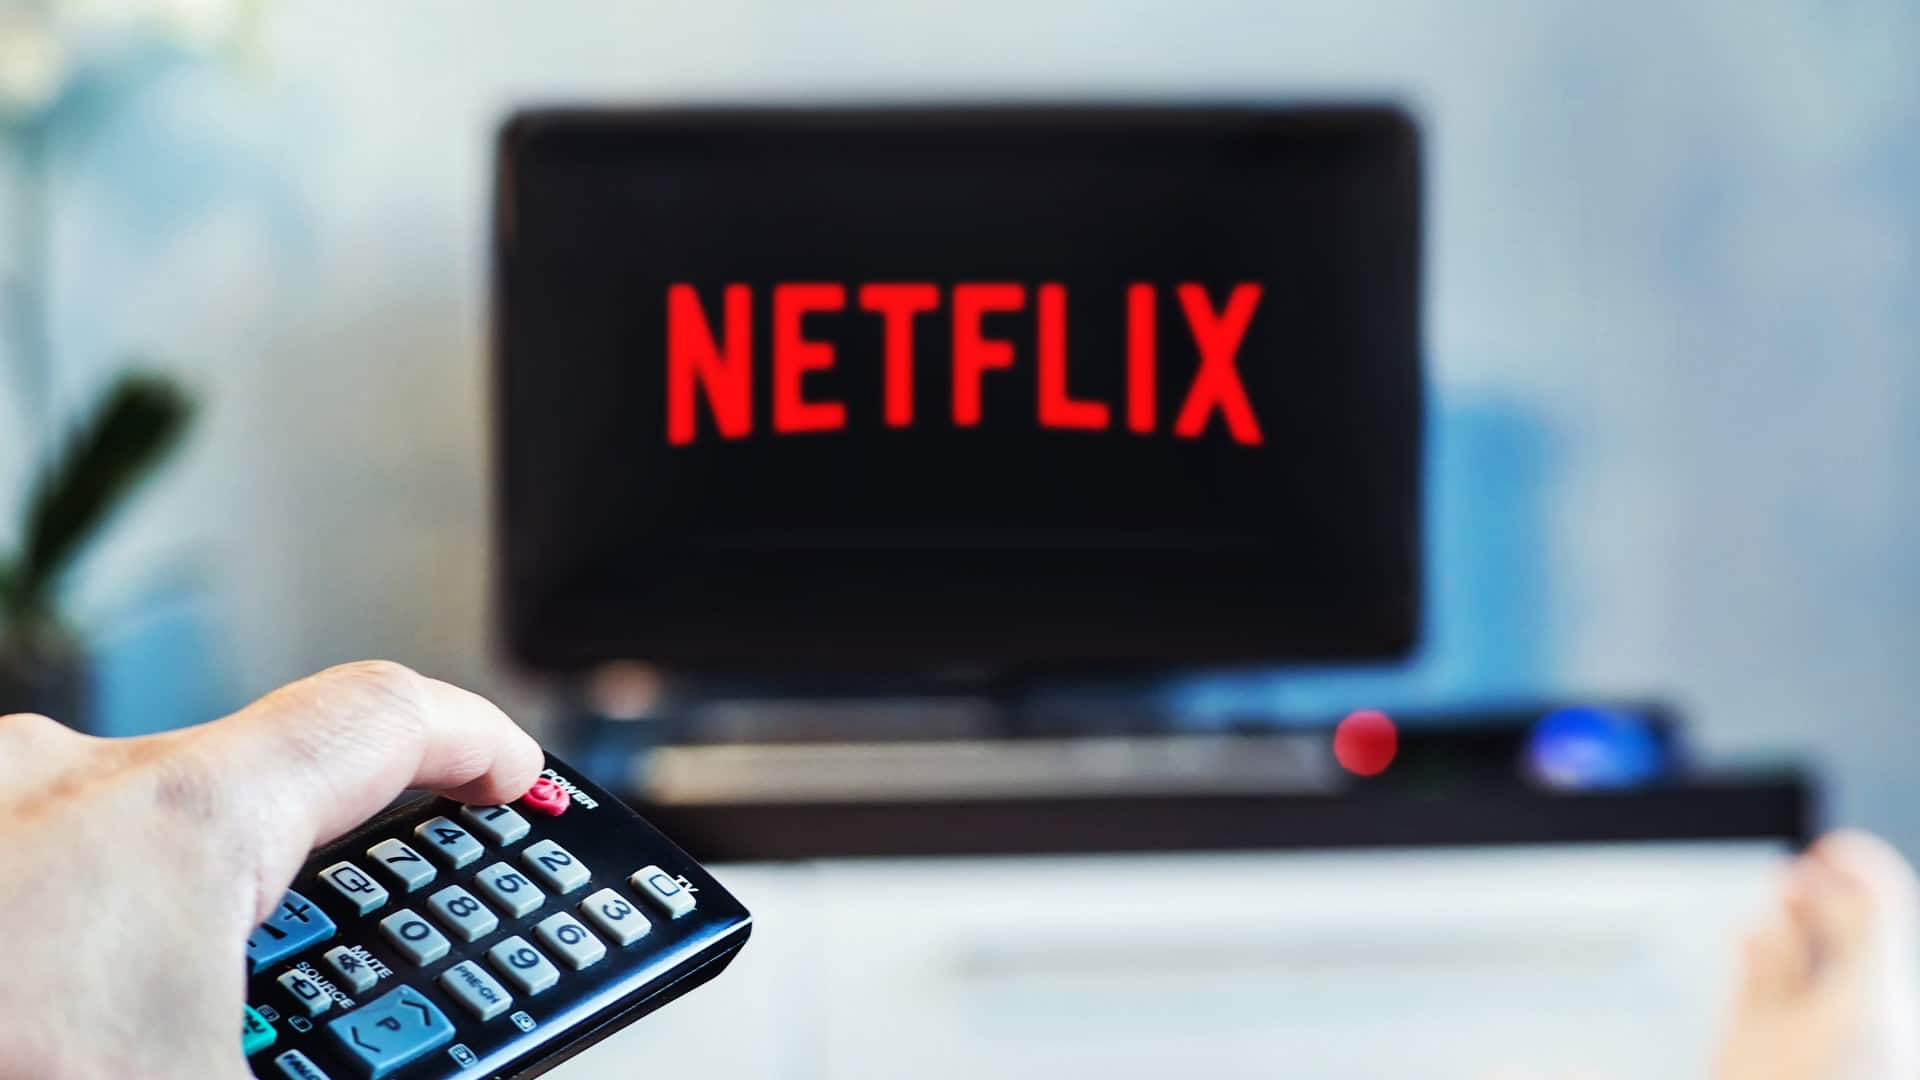 The 10 most-watched series on Netflix from January 2 to 8, 2023